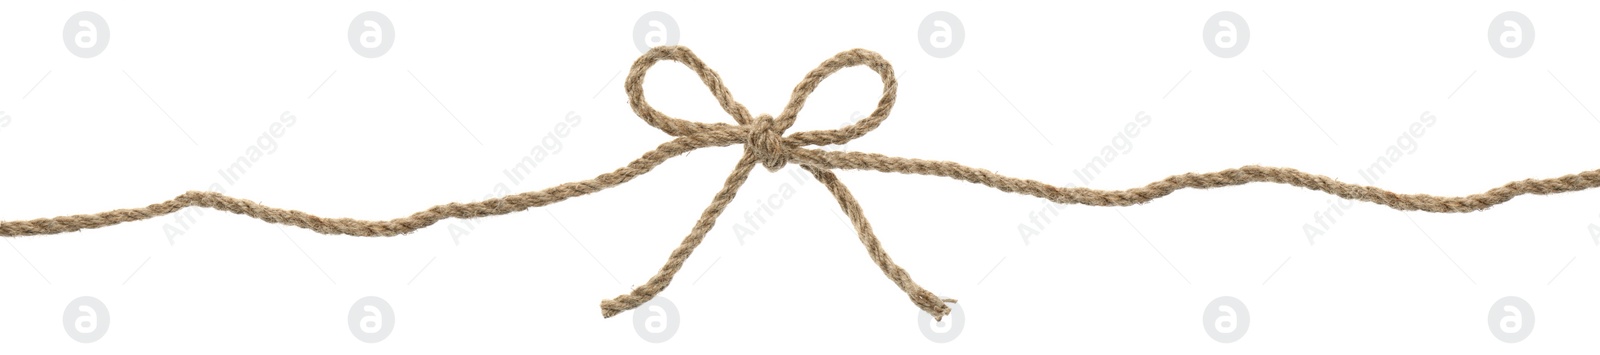 Image of Hemp rope with bow knot on white background